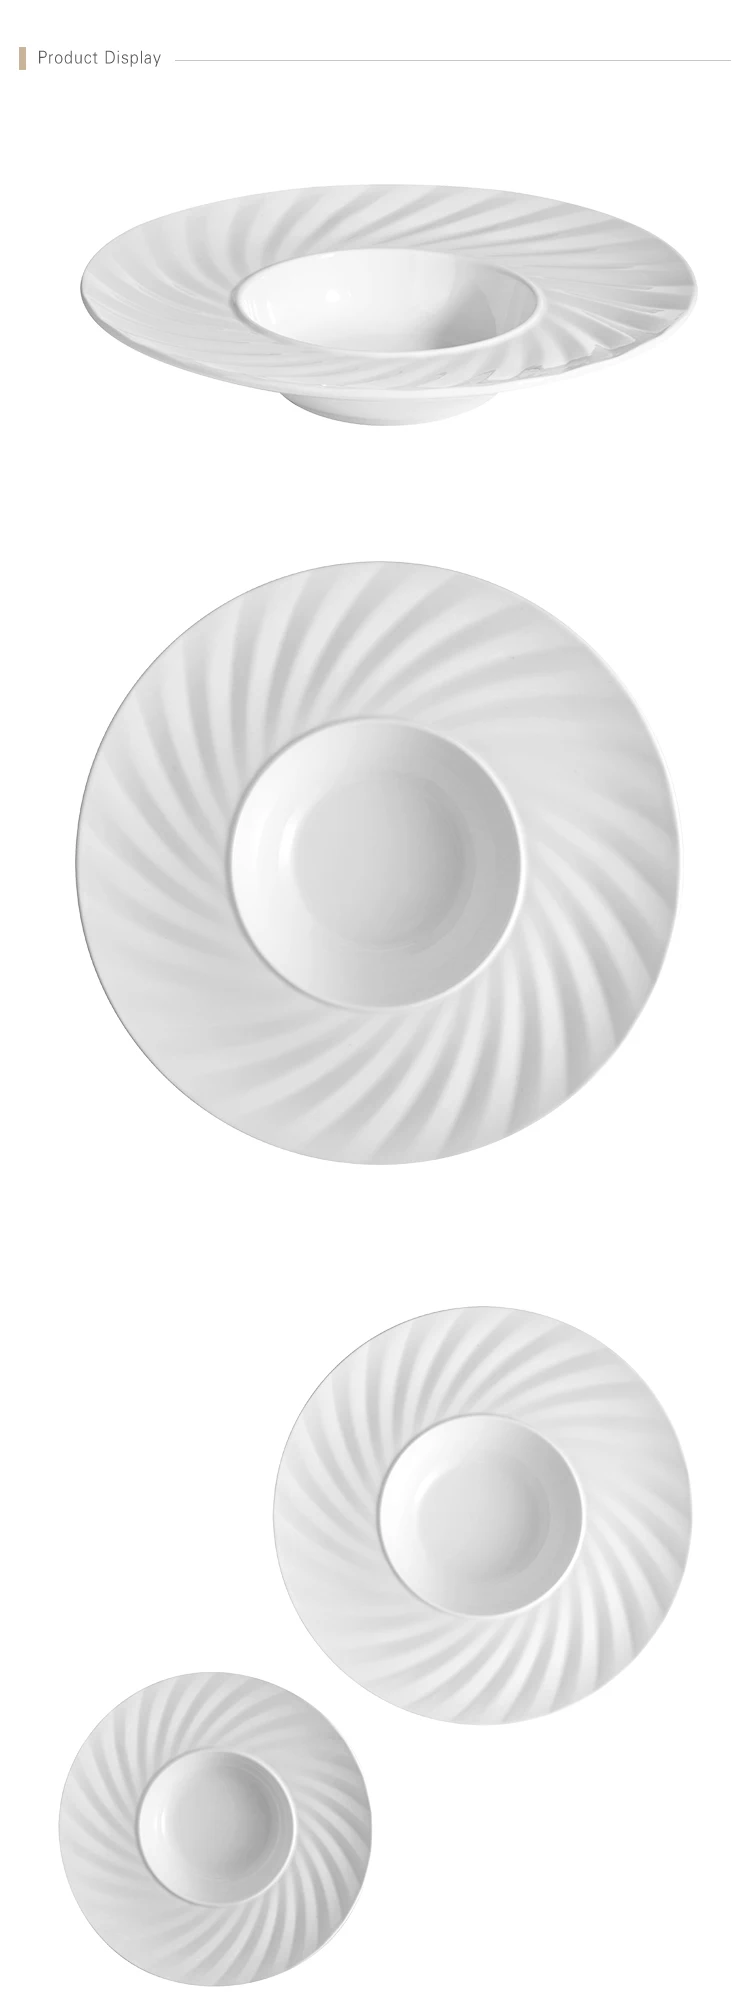 Two Eight Best porcelain dishes manufacturers for dinner-8